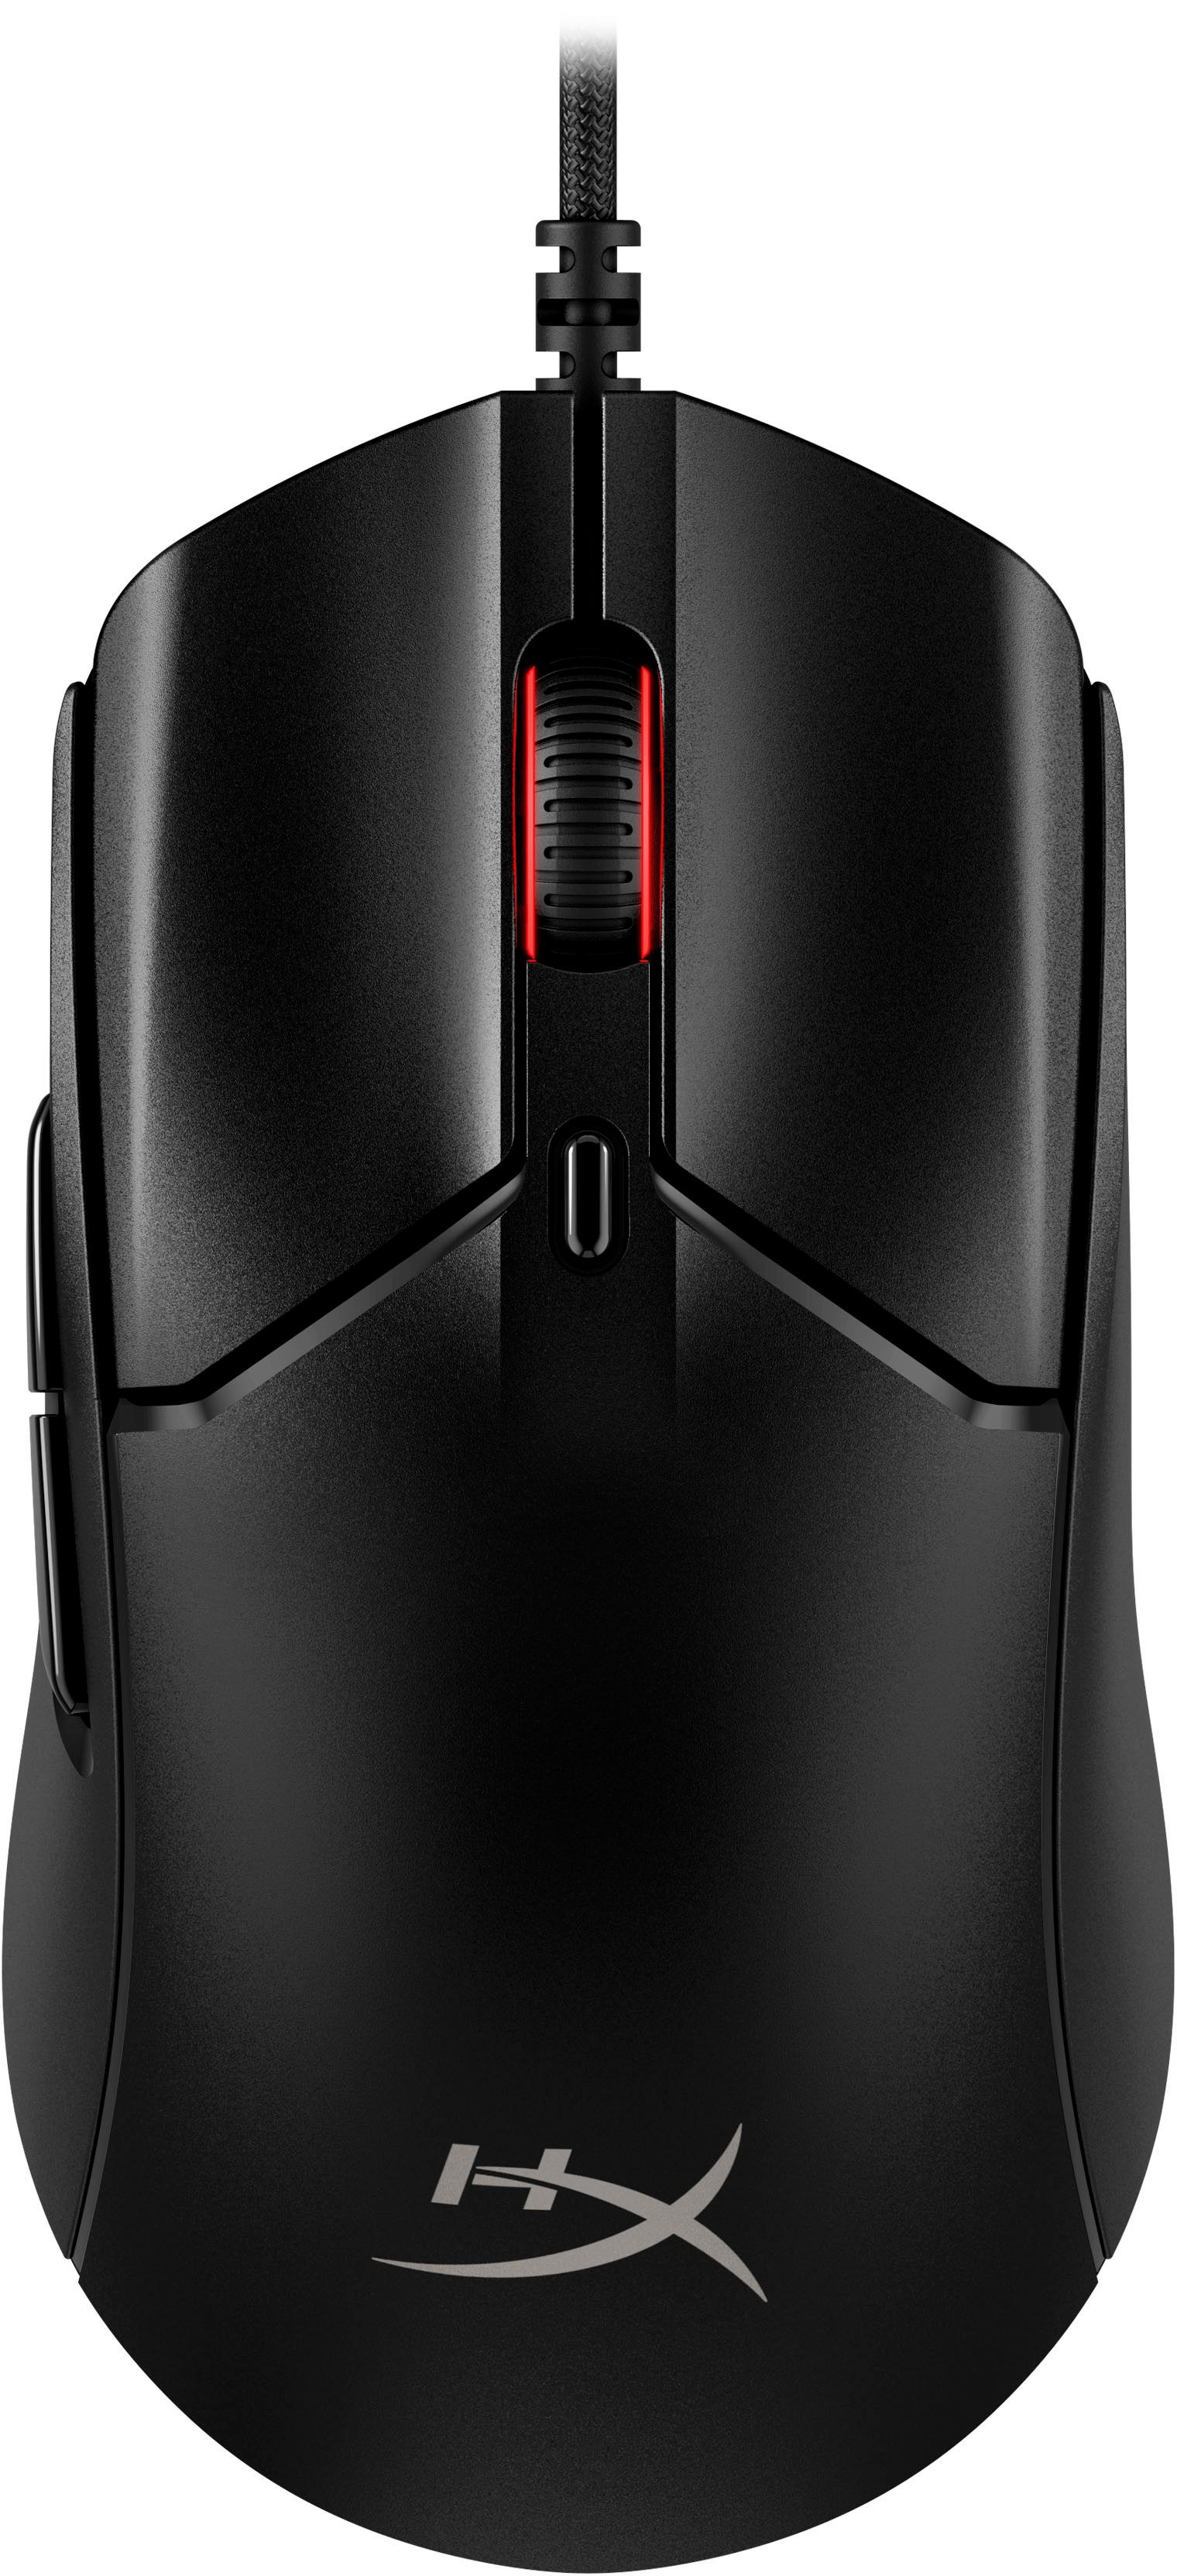 HyperX Pulsefire Best Lightweight Mouse Wired Buy Gaming with Optical Lighting RGB Haste - Black 6N0A7AA 2